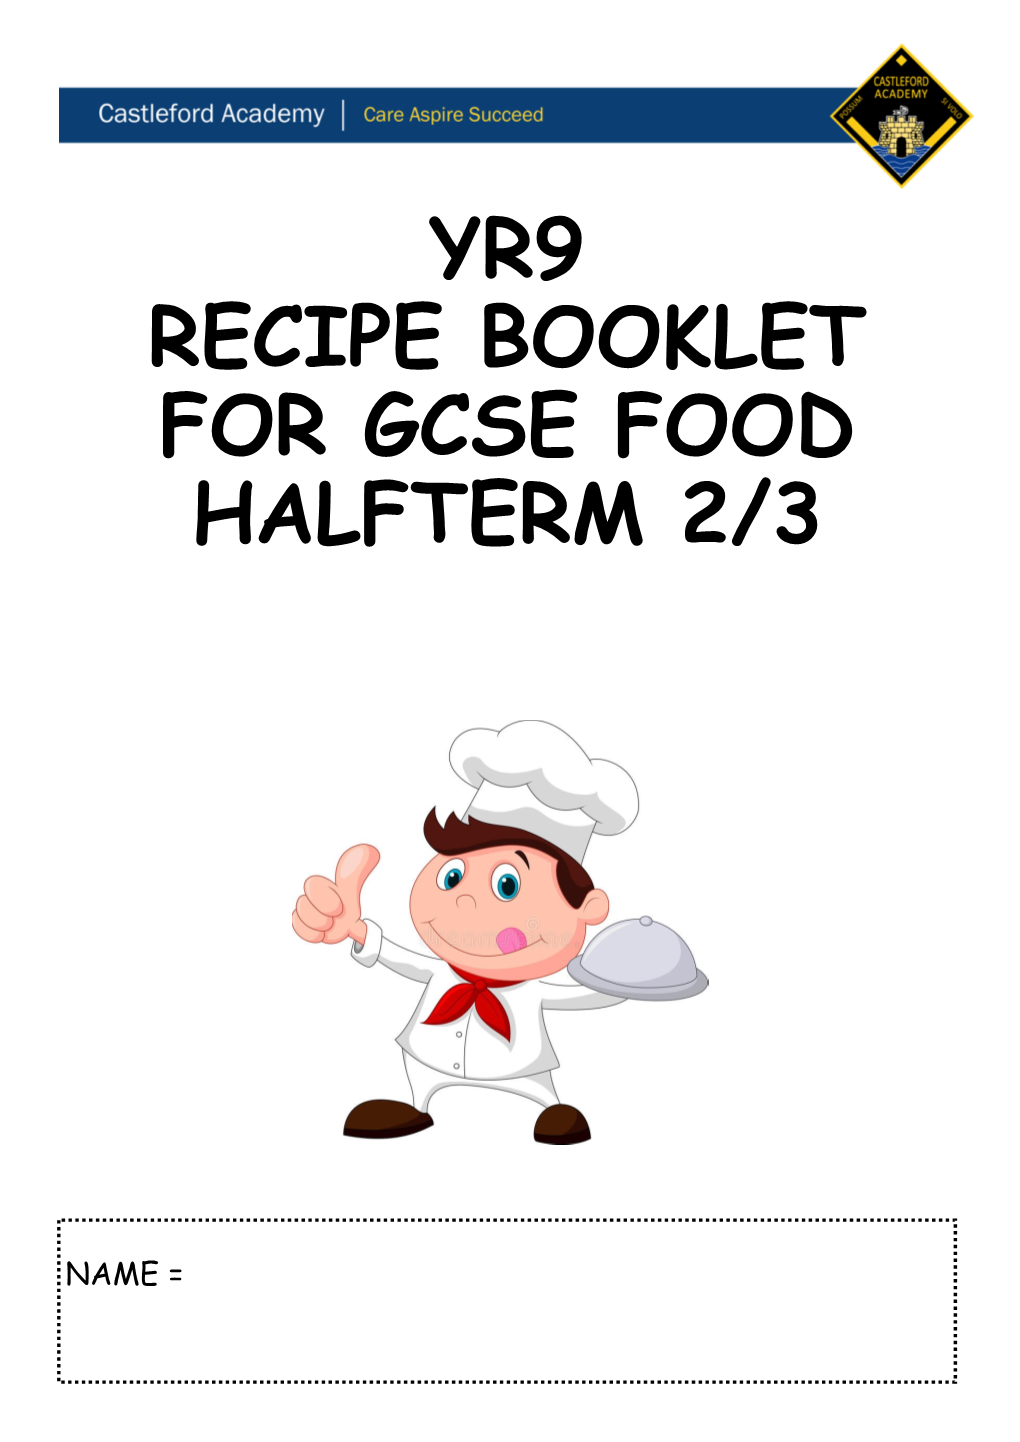 Yr9 Recipe Booklet for Gcse Food Halfterm 2/3